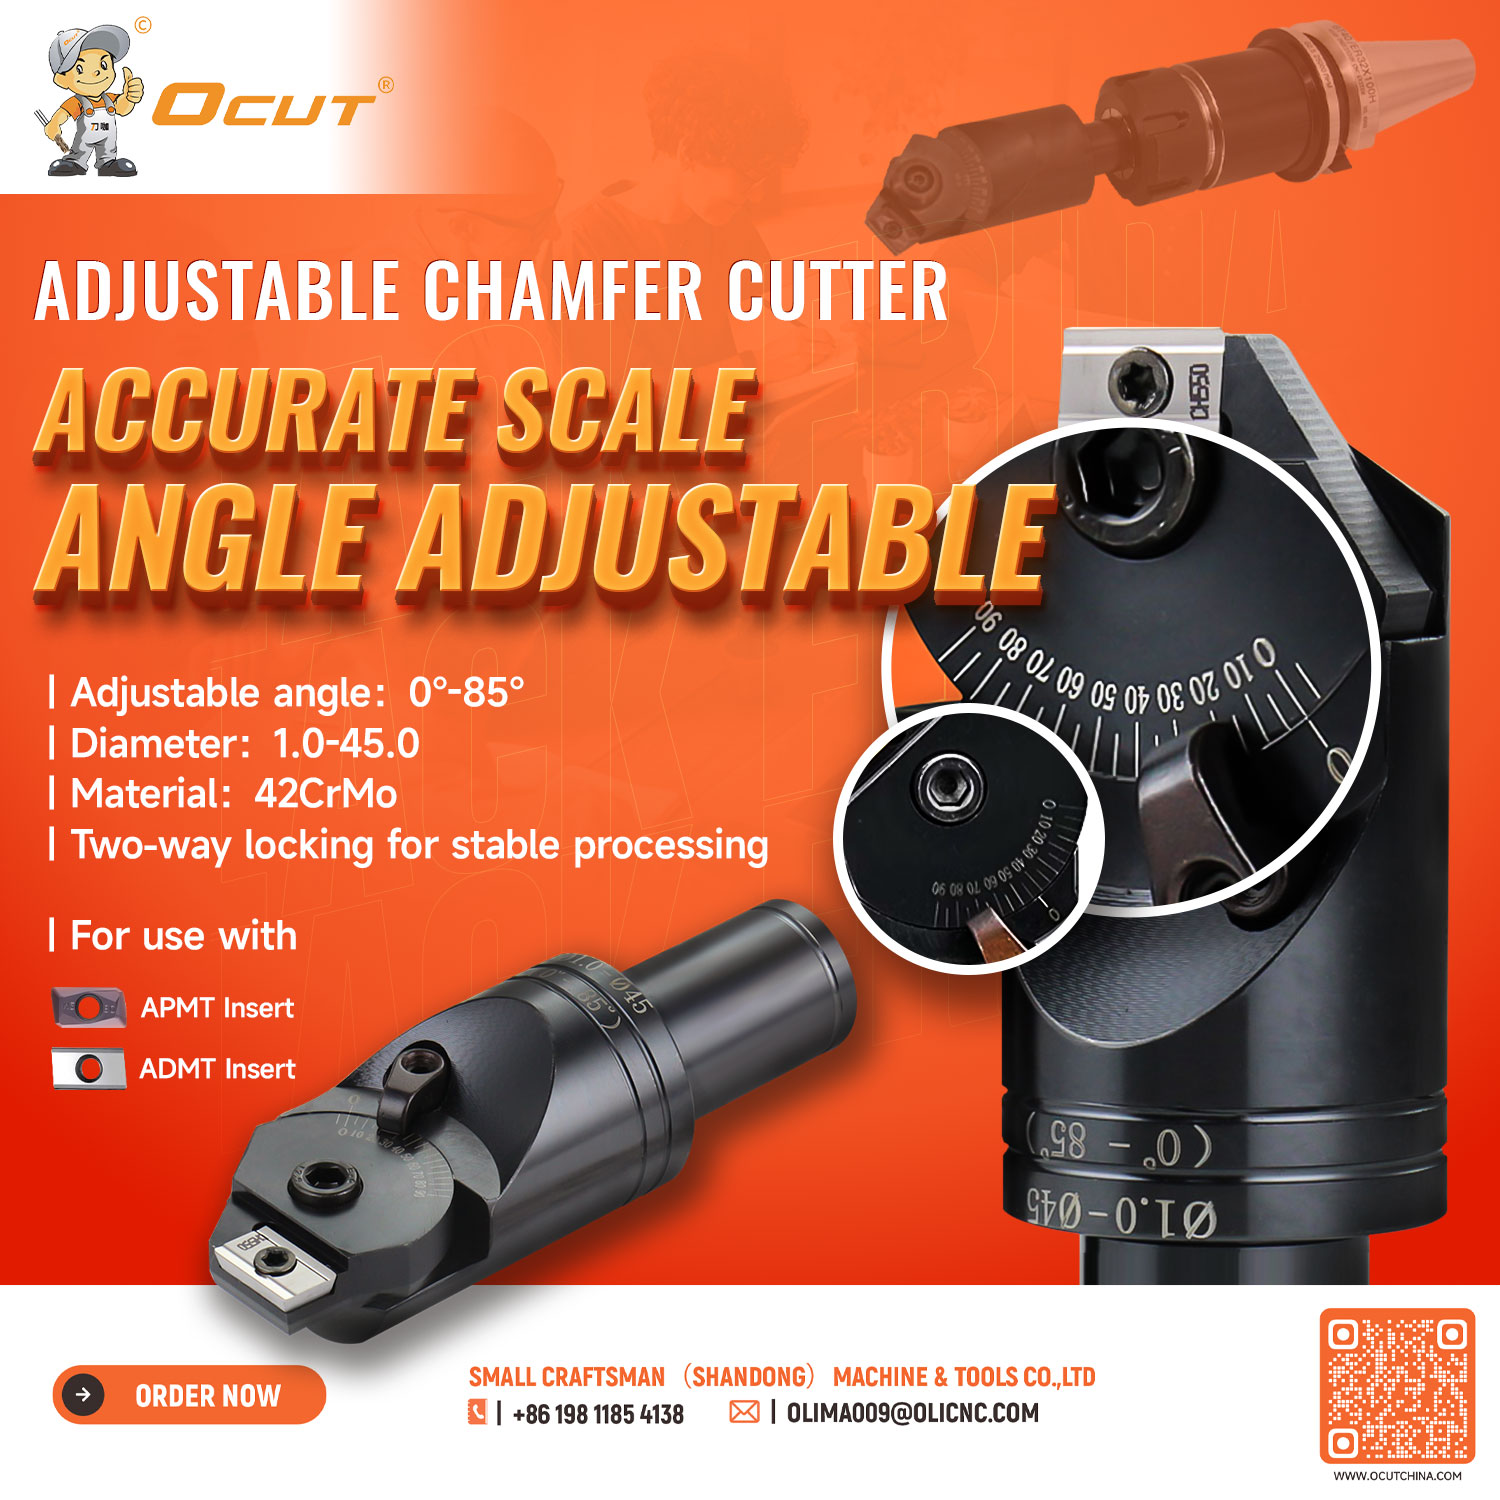 Ocut C20 C25 Universal Chamfering Cutter with ADNT1604 Insert Adjustable Chamfering Cutter Multi-Purpose Milling Cutter Bar 0-85 Degree Chamfering - Chamfering and deburring tools - 1